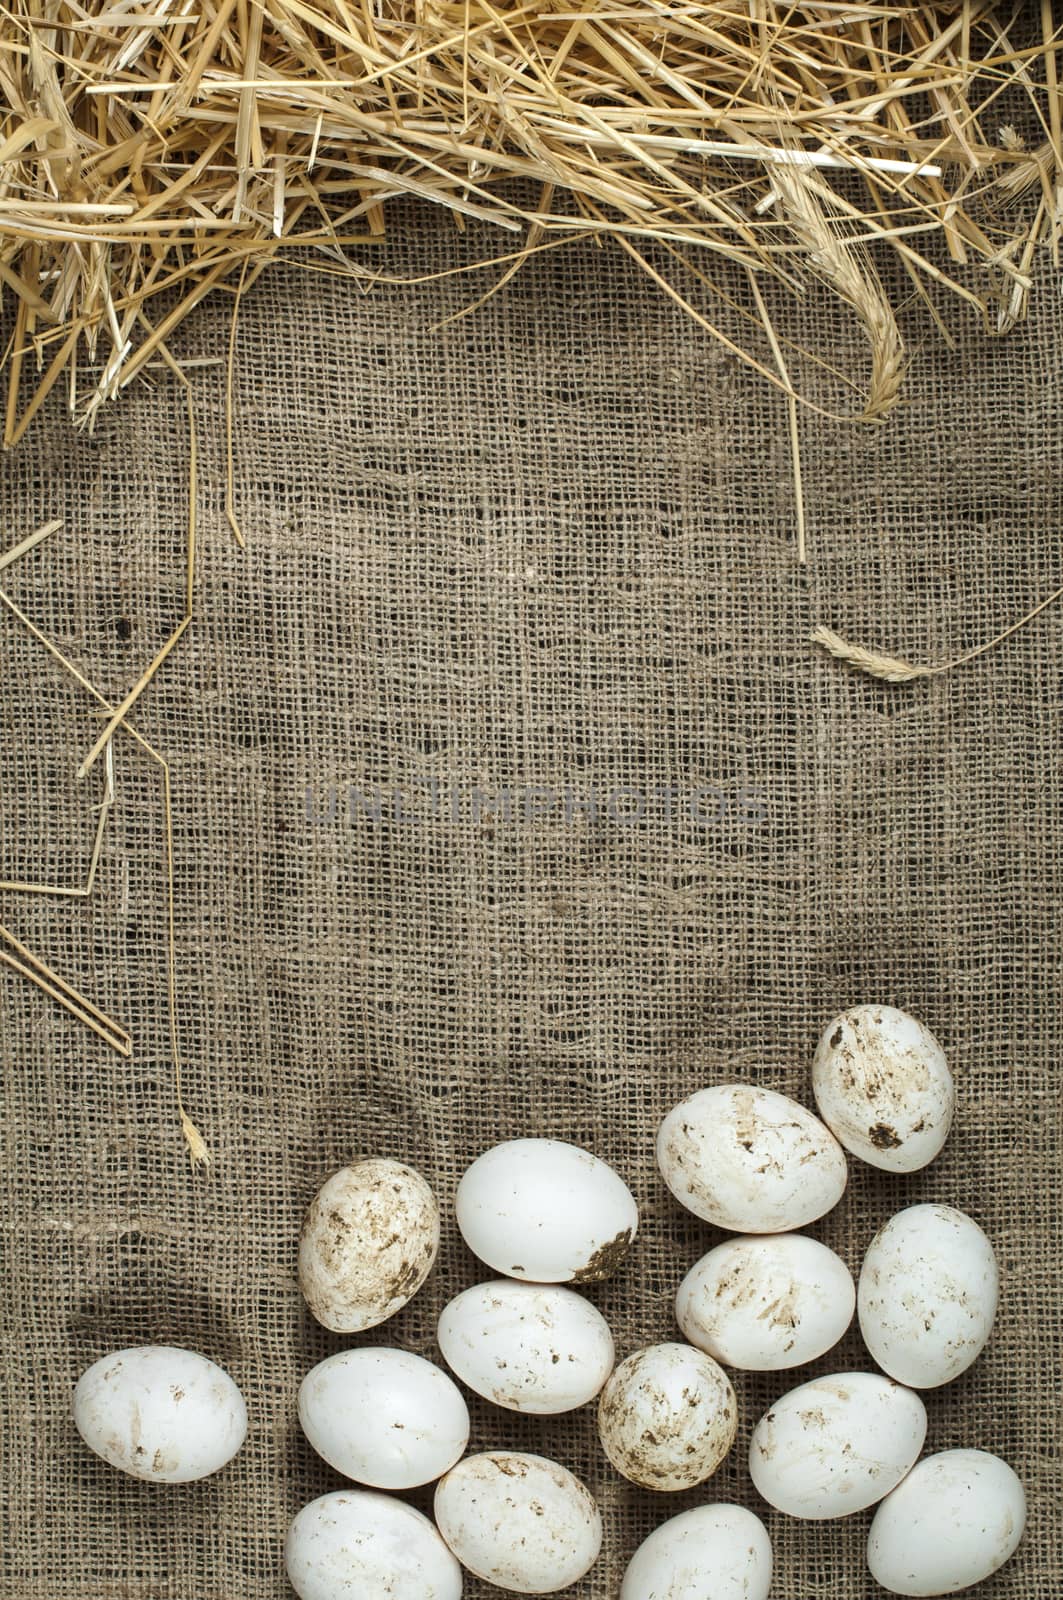 Organic white eggs on sackcloth and straw. Copy space
